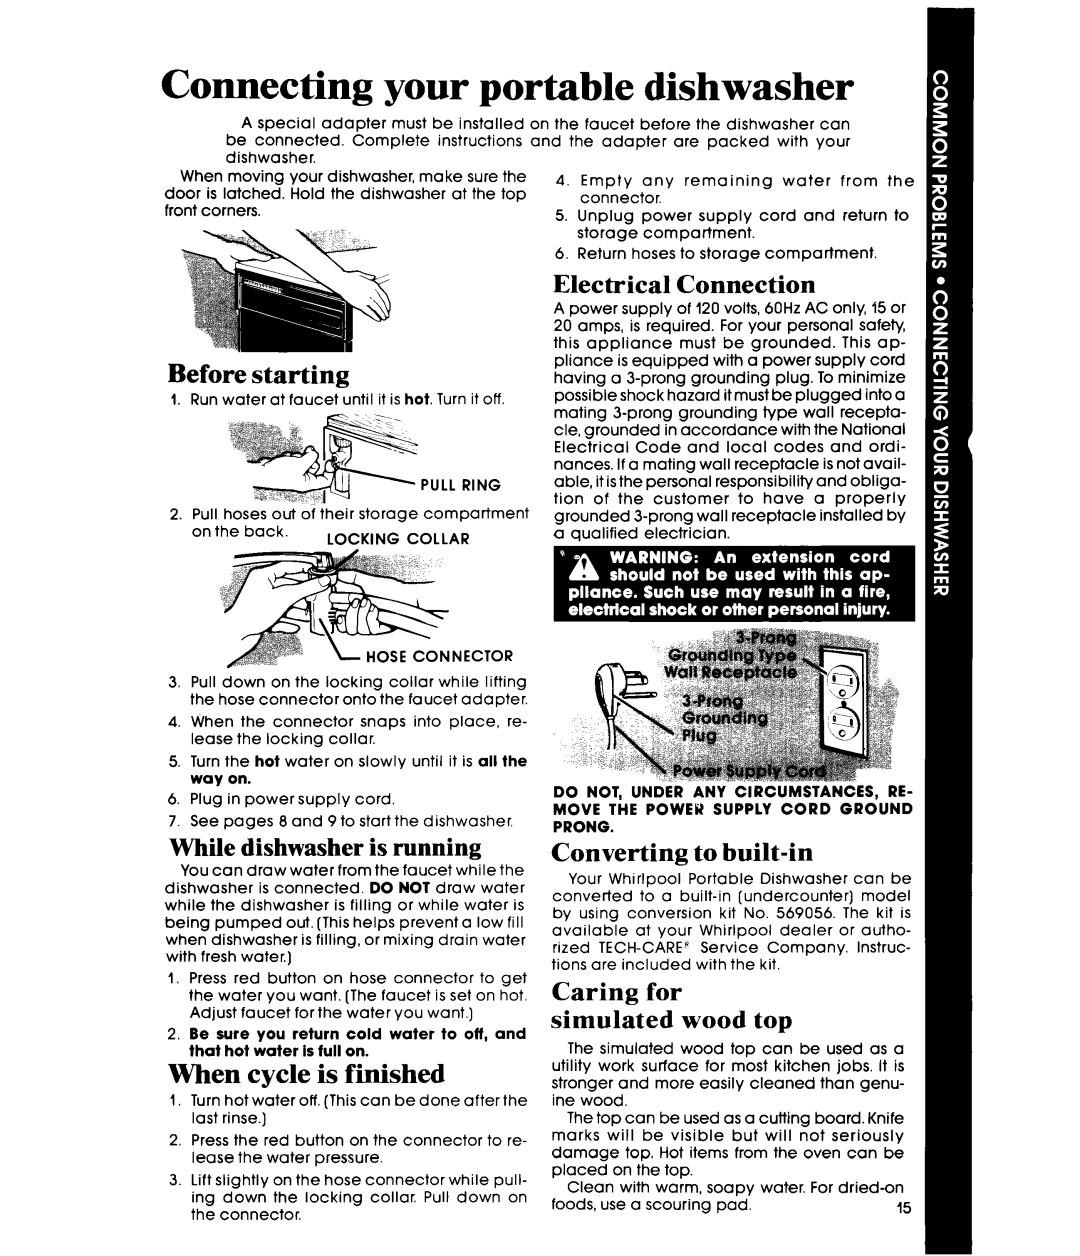 Whirlpool DP8700XT Series manual Connecting your portable dishwasher, Before starting, While dishwasher is running 